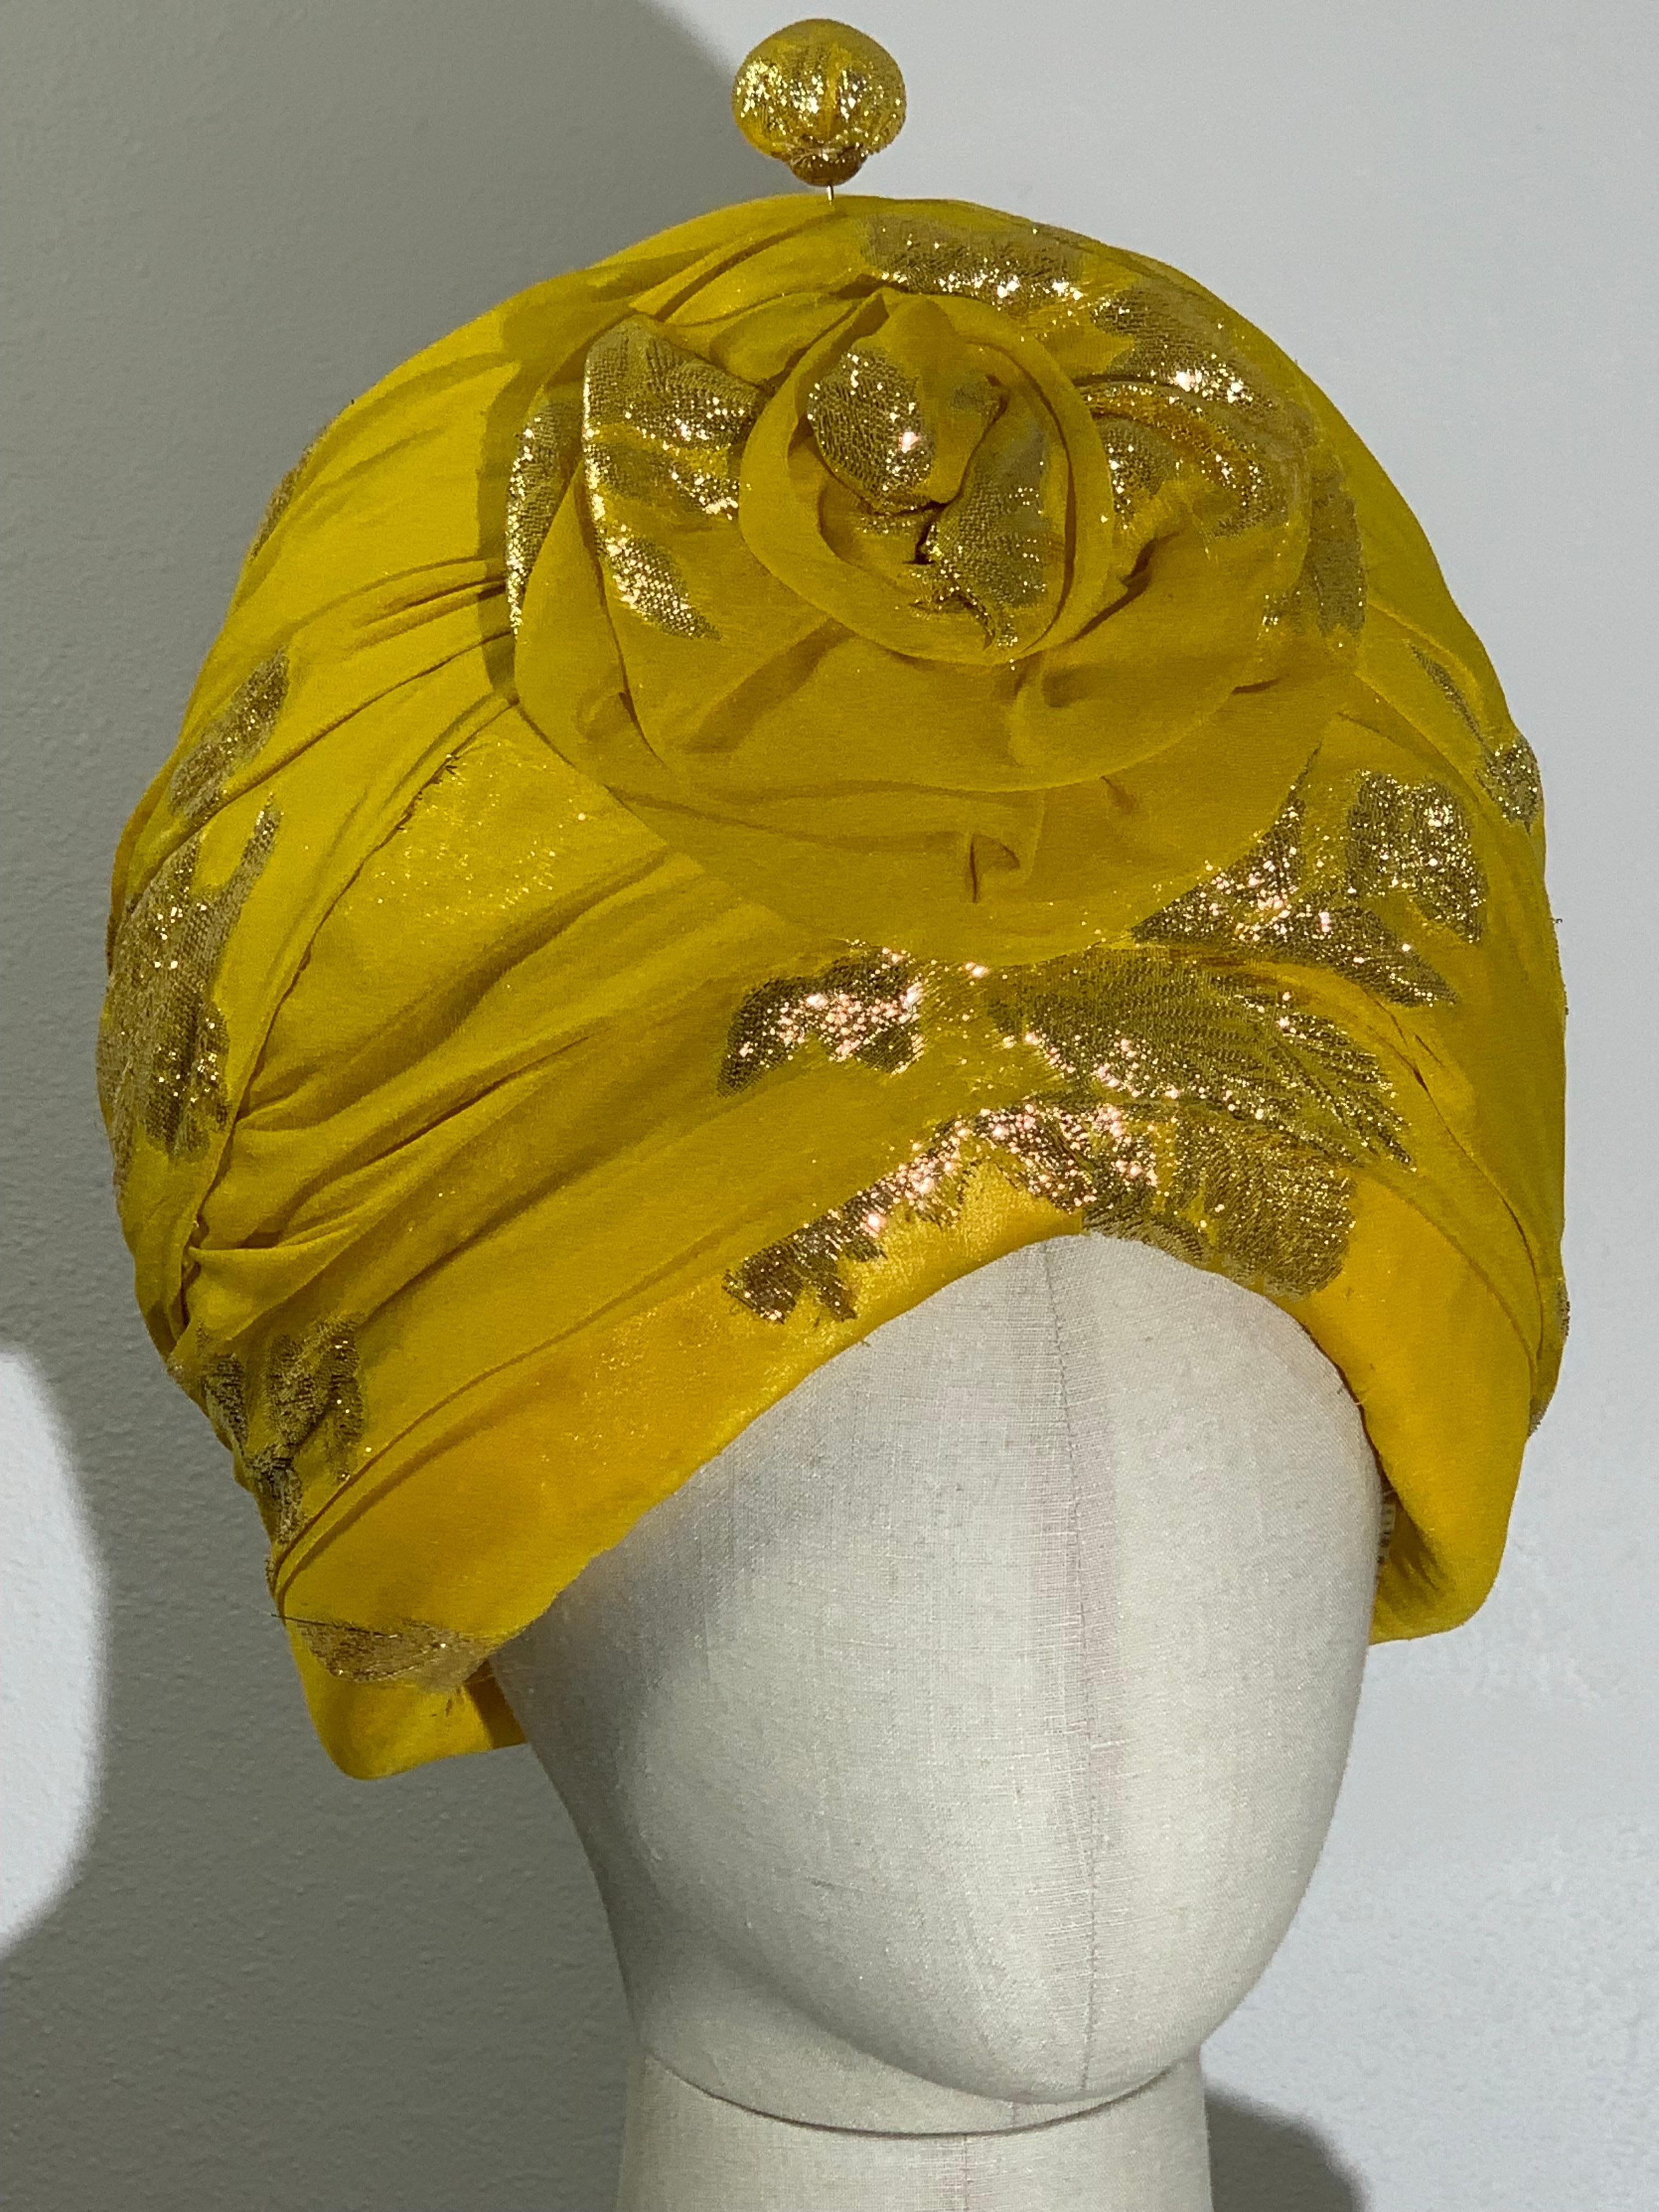 Custom Made Suzanne Couture Millinery Canary Yellow Silk Chiffon Lame Floral Patterned Tufted and Padded Turban w Flower and Coordinating Large Hatpin.  Lined in yellow satin. Inner combs for securing.  US size 6 3/8.

Please visit our 1Dibs Store